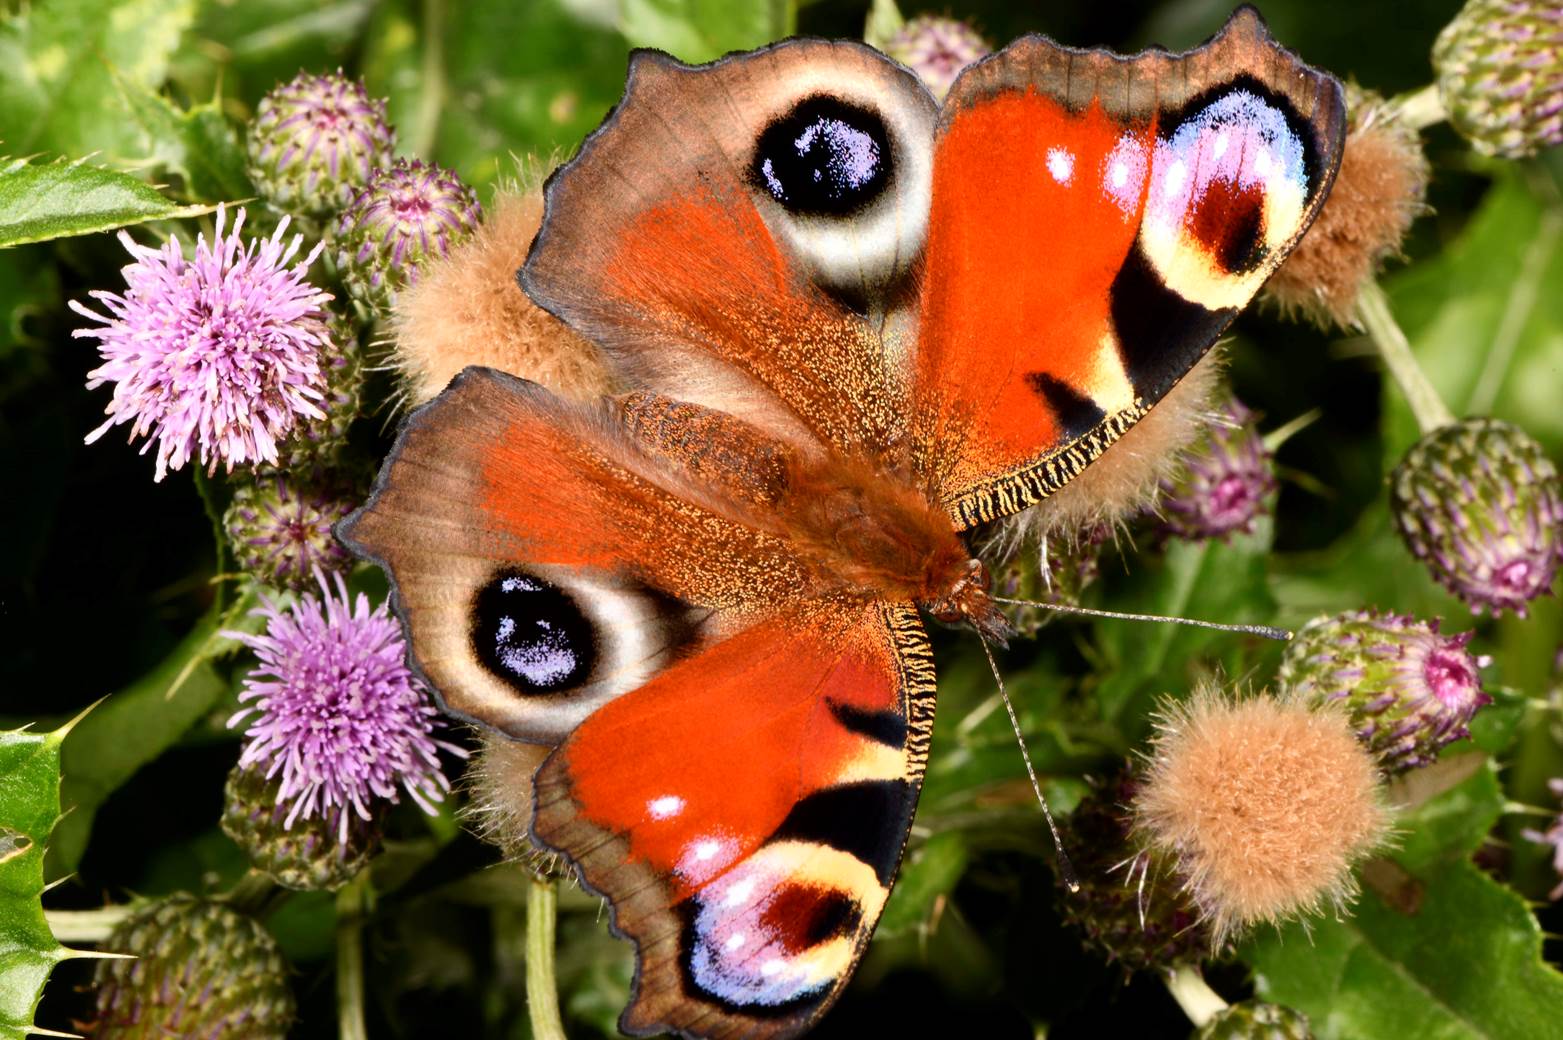 A butterfly on a flower

Description automatically generated with medium confidence